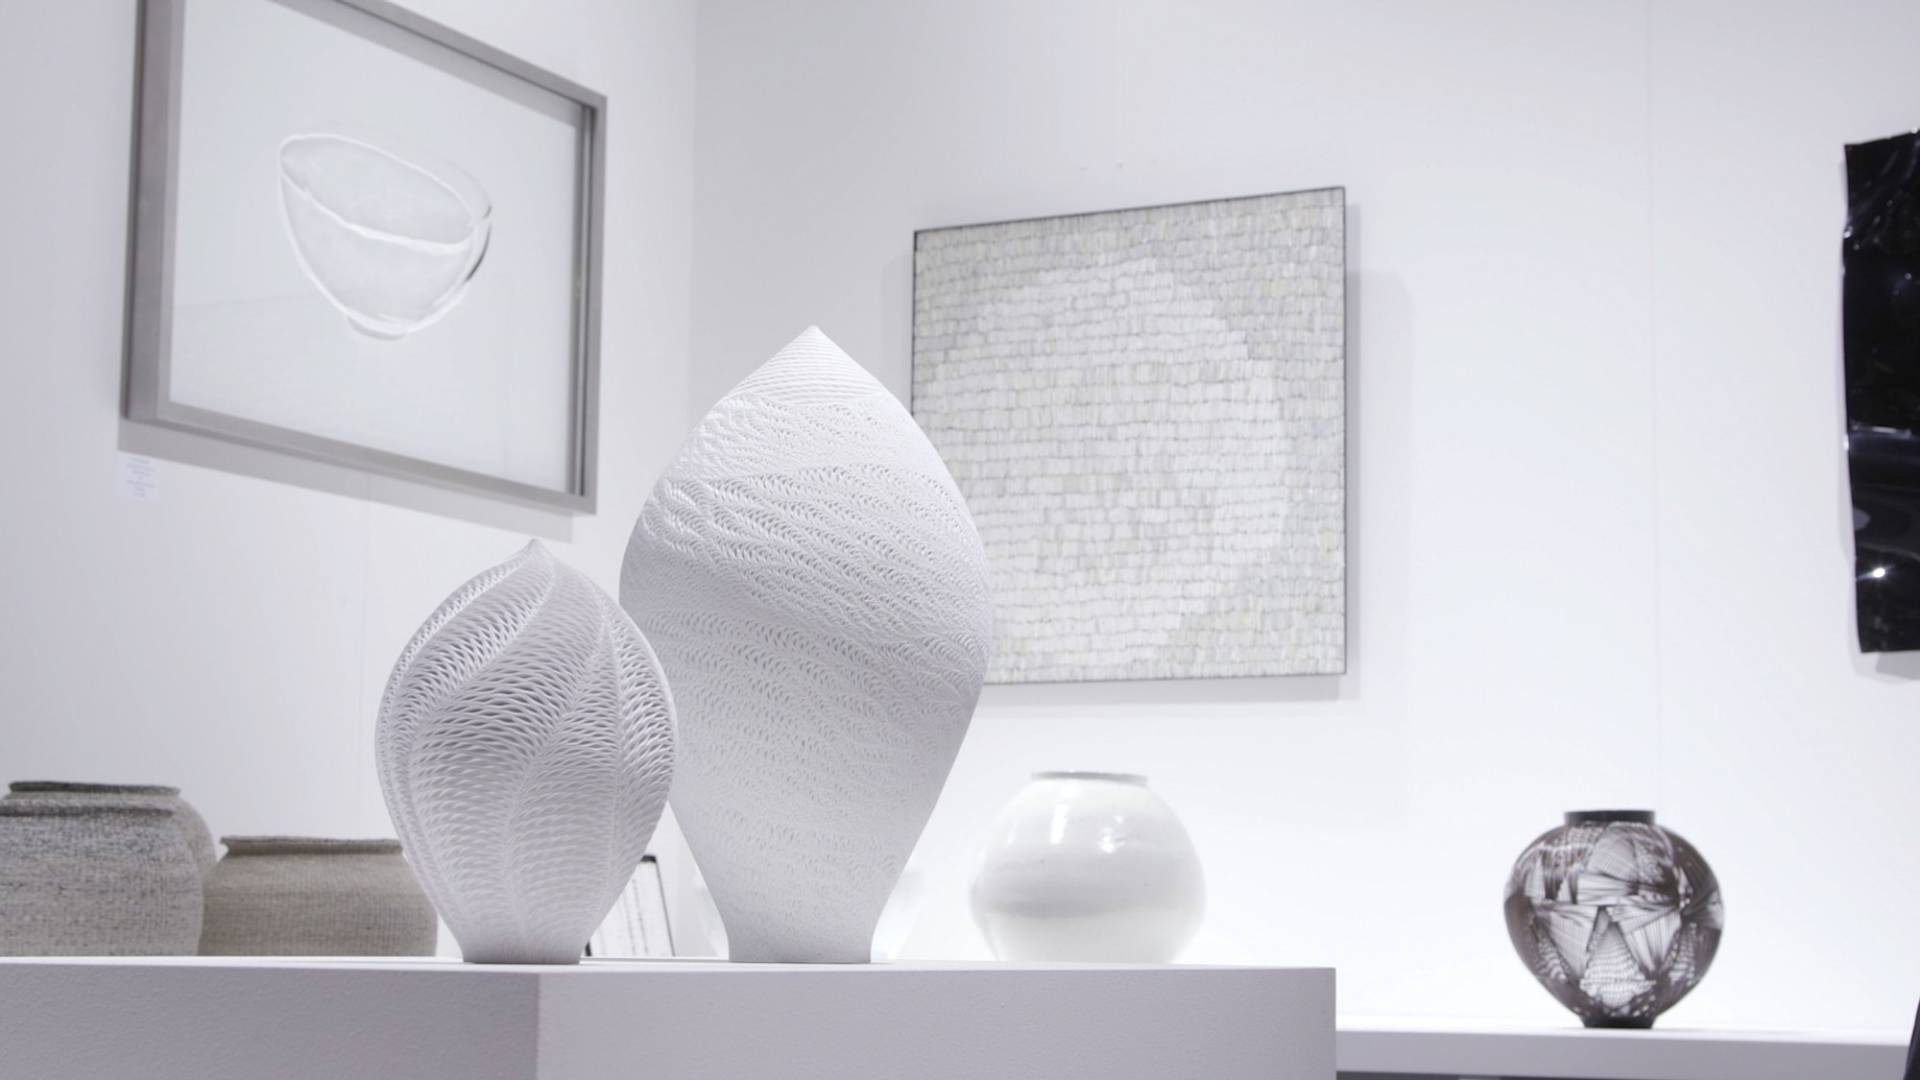 Exhibition stand with ceramic sculptures in white-and-grey tones, vases and wall art.